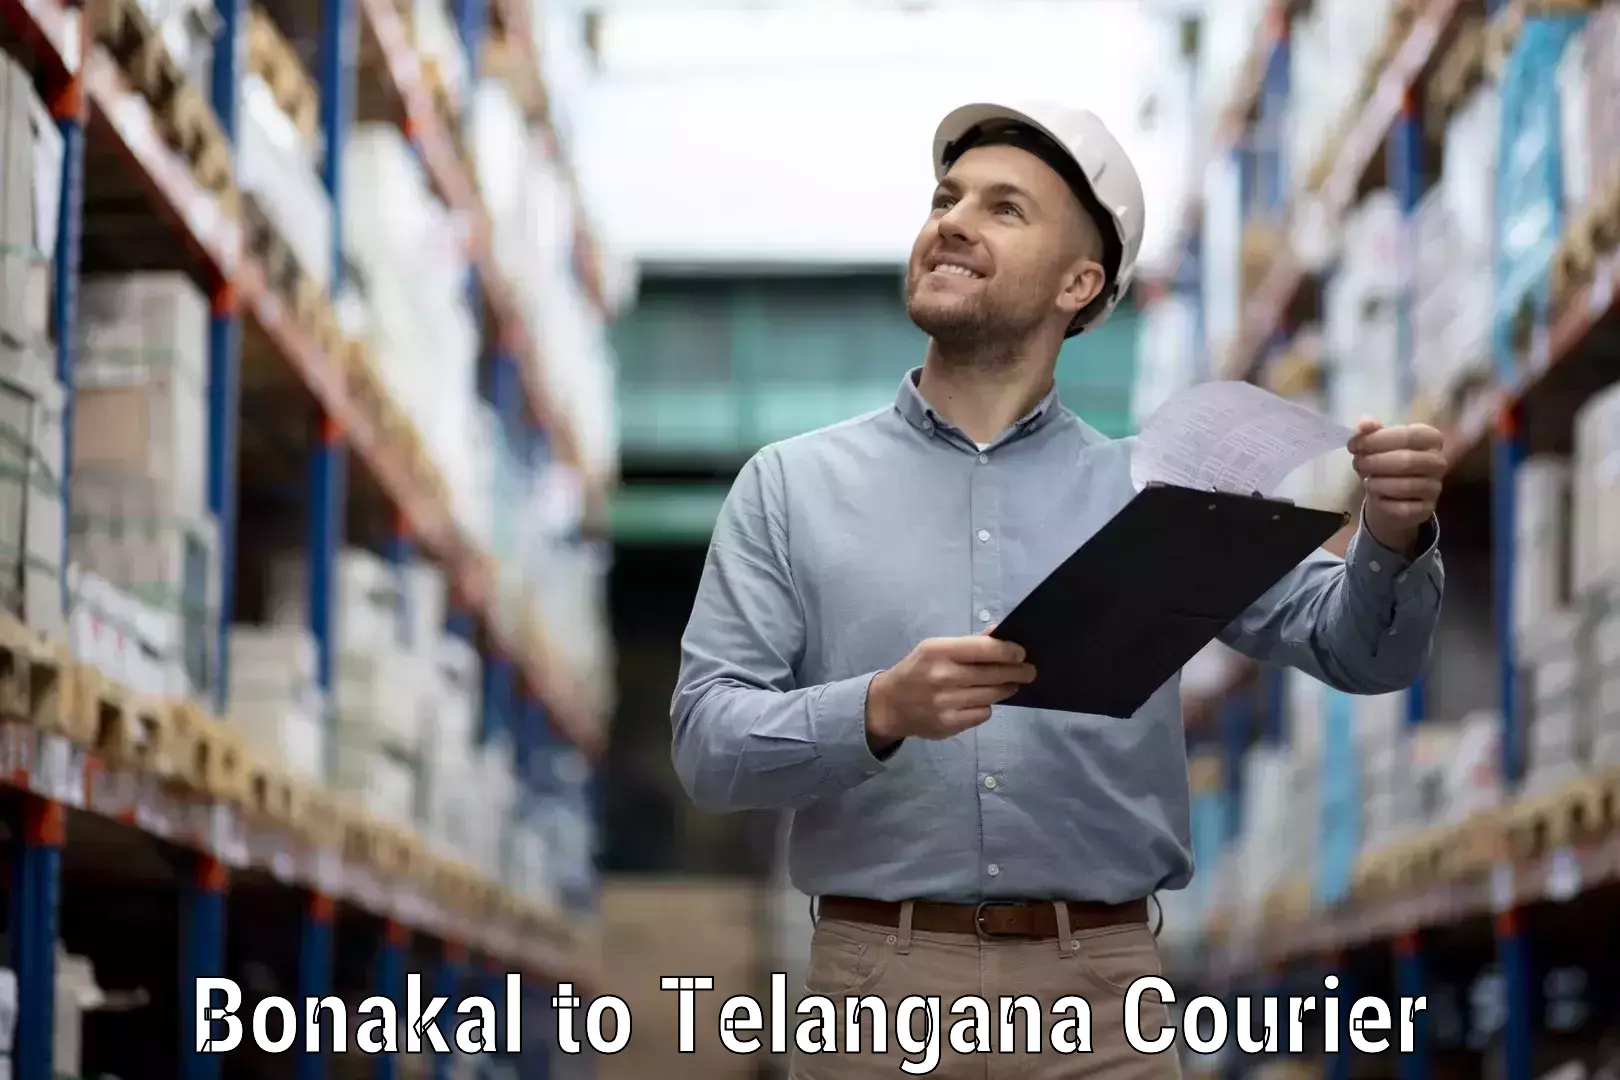 Efficient shipping operations Bonakal to Manneguda